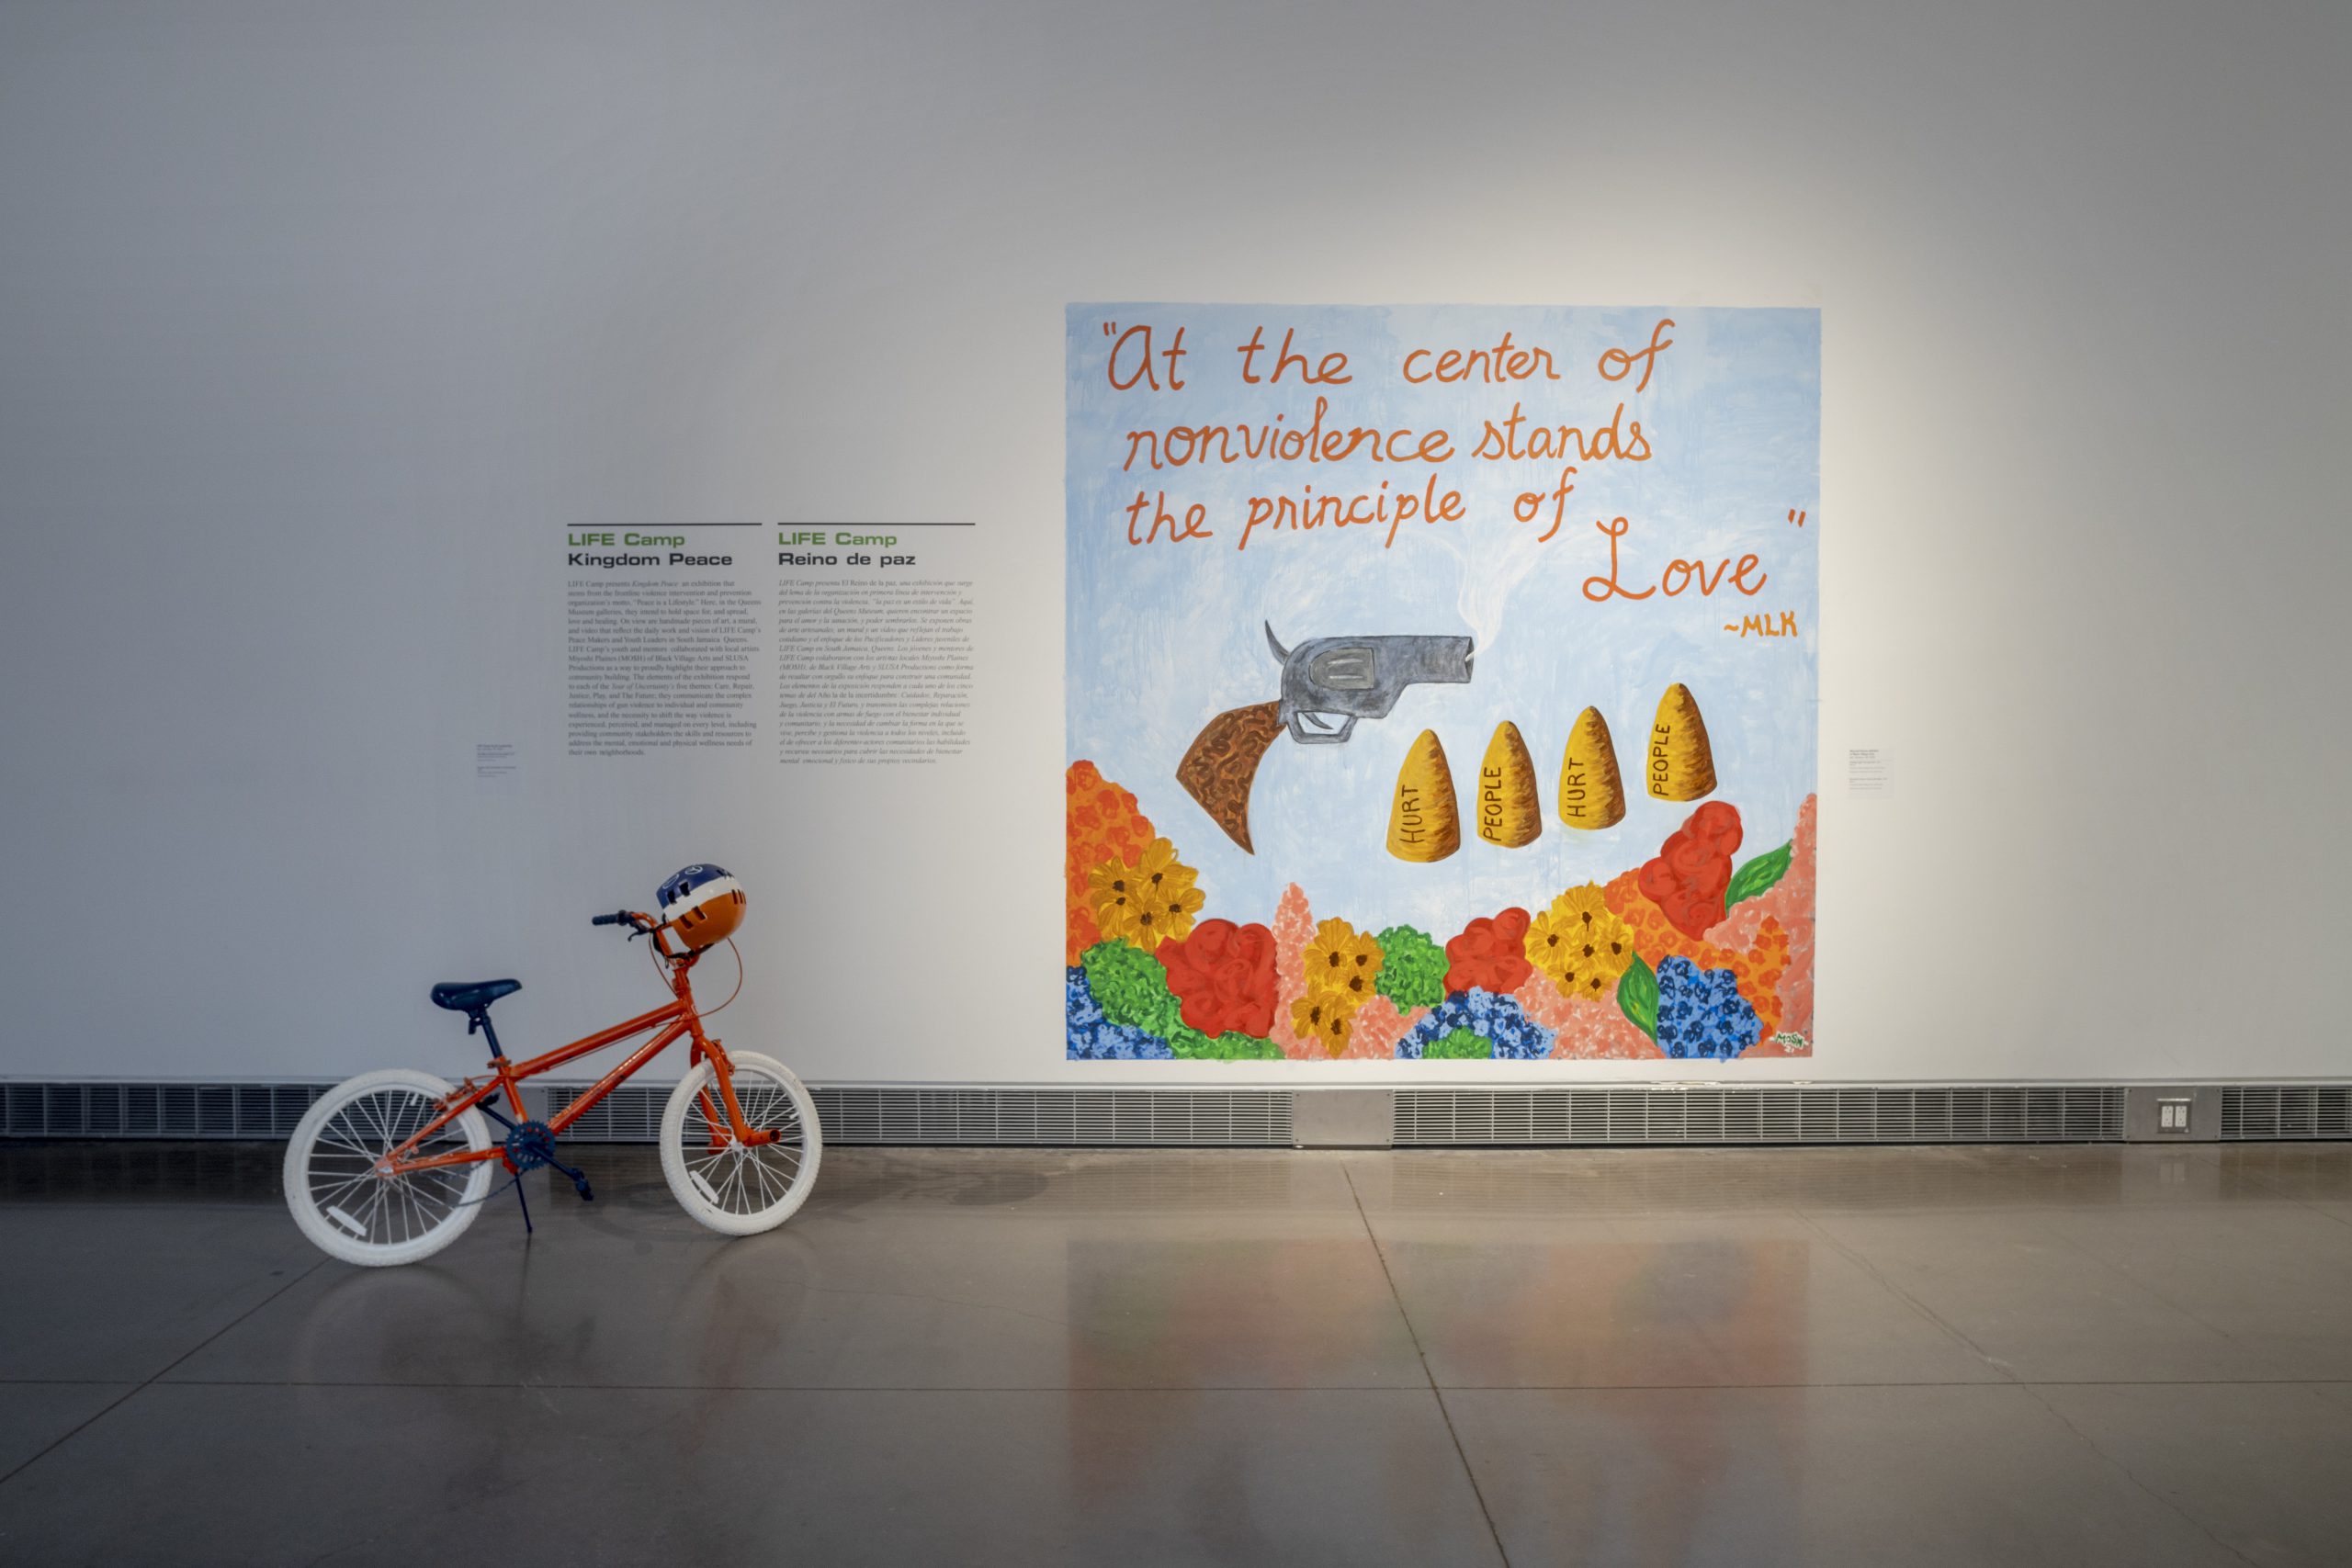 A white exhibition wall with a mural. The mural has a soft blue background and a bed of orange, blue, yellow, and pink flowers at the bottom. Hovering above the flowers is a smoking gun and four large bullets with the phrase “hurt people hurt people” written across them. Above that is a quote by MLK that reads “At the center of nonviolence stands the principle of Love” in orange cursive.